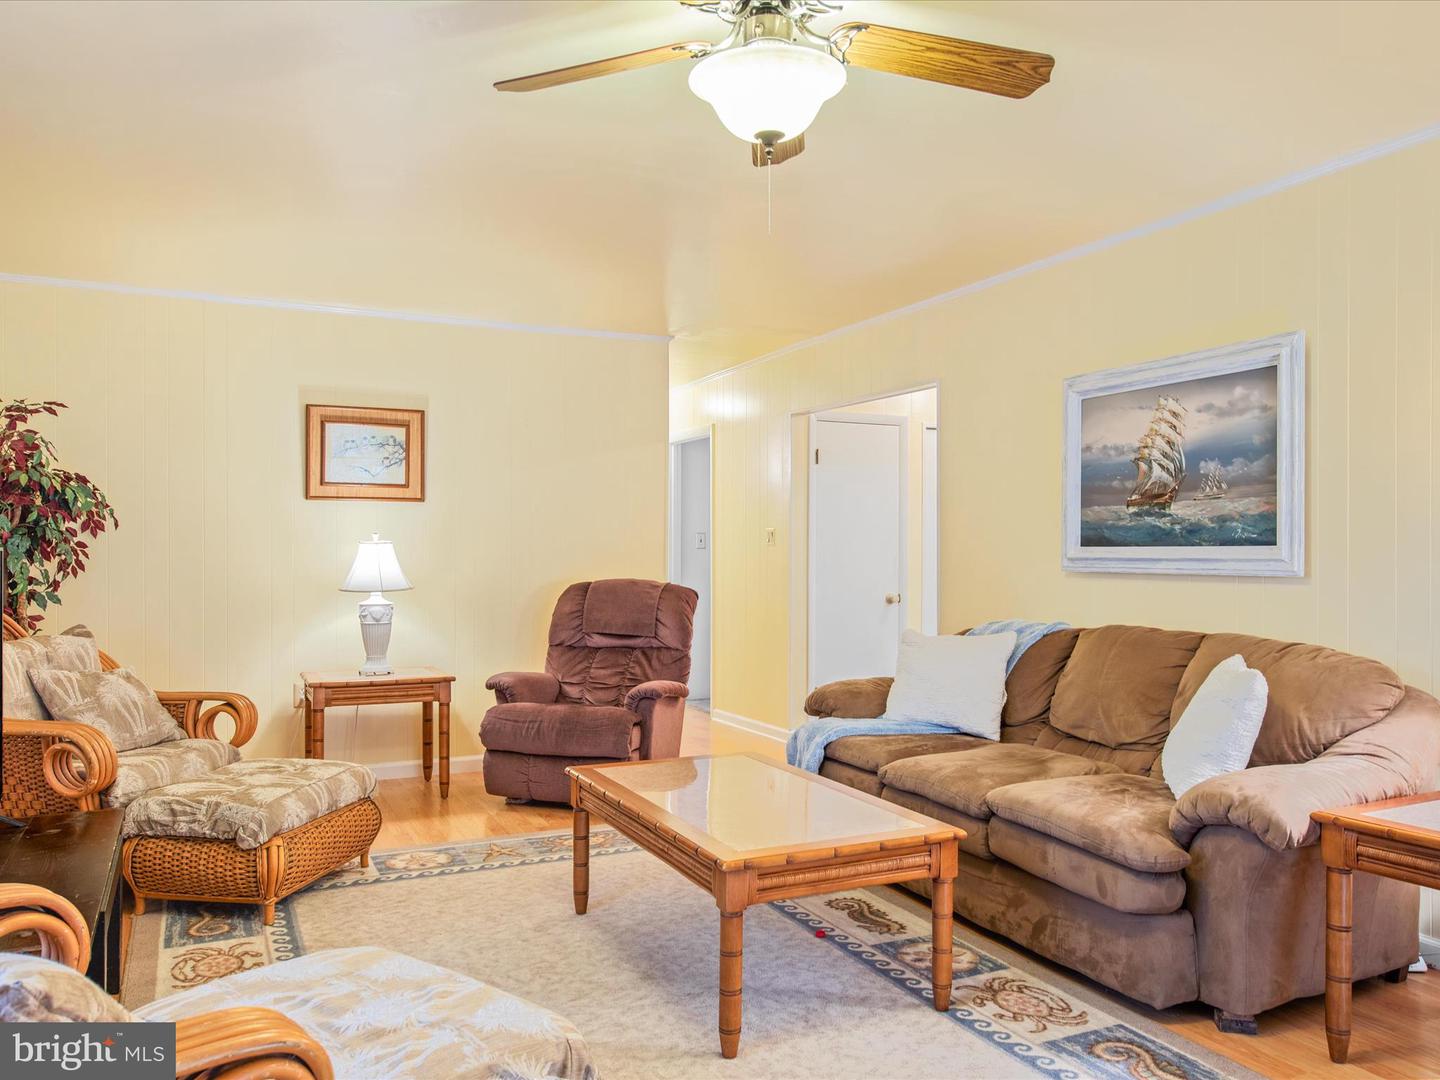 MDWO2019272-802894945052-2024-03-01-08-17-39 20 Southwind Ct | Berlin, MD Real Estate For Sale | MLS# Mdwo2019272  - 1st Choice Properties